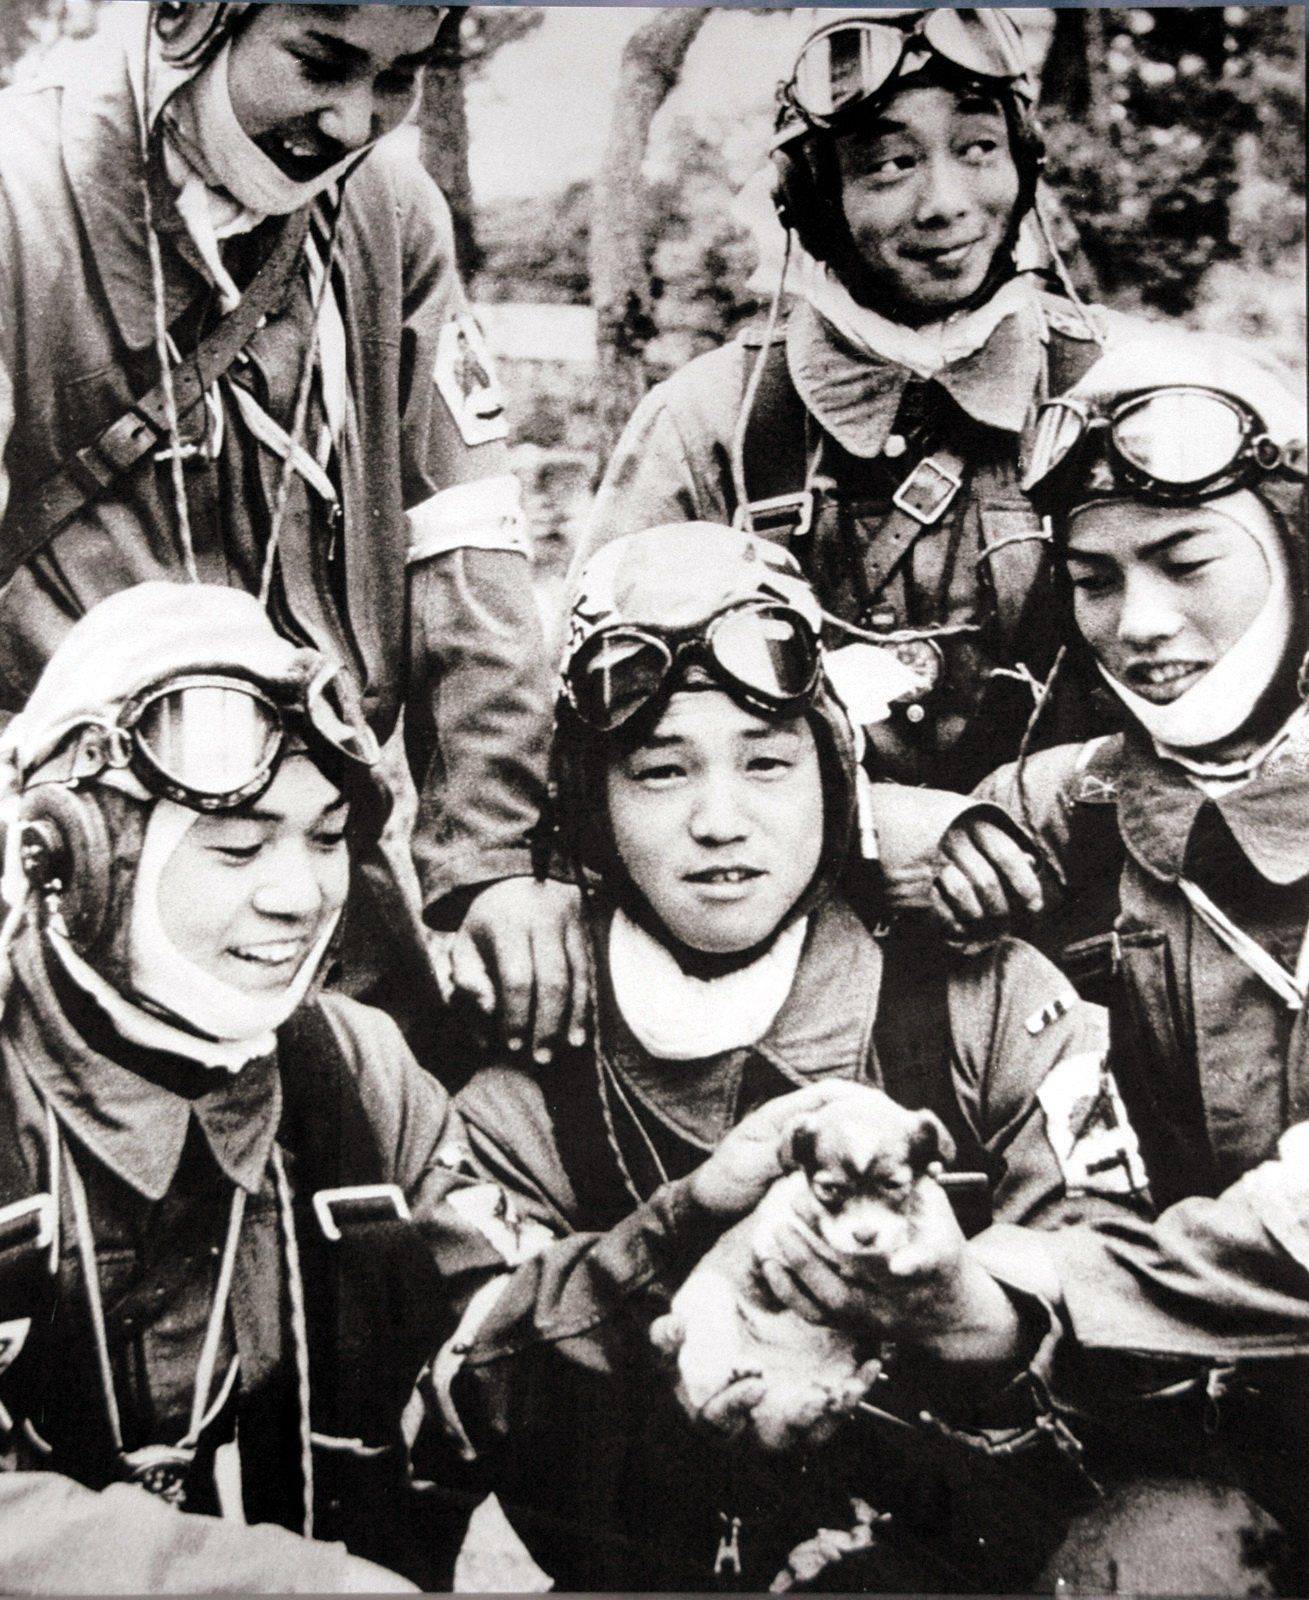 kamikaze+pilots+playing+with+a+puppy,+May+26,+1945.jpg